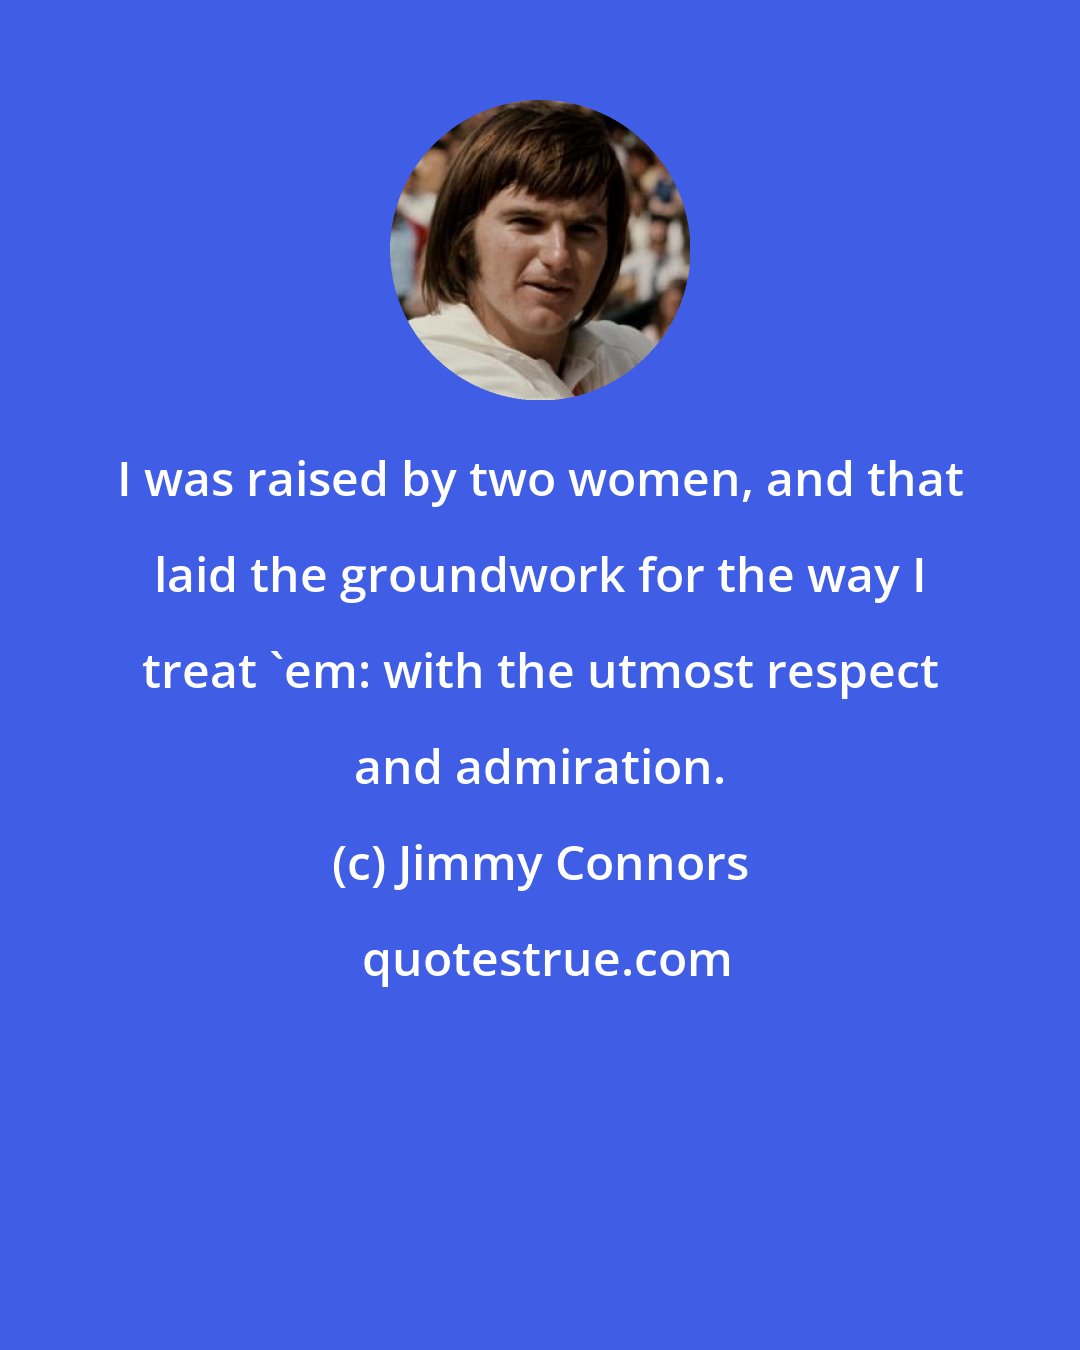 Jimmy Connors: I was raised by two women, and that laid the groundwork for the way I treat 'em: with the utmost respect and admiration.